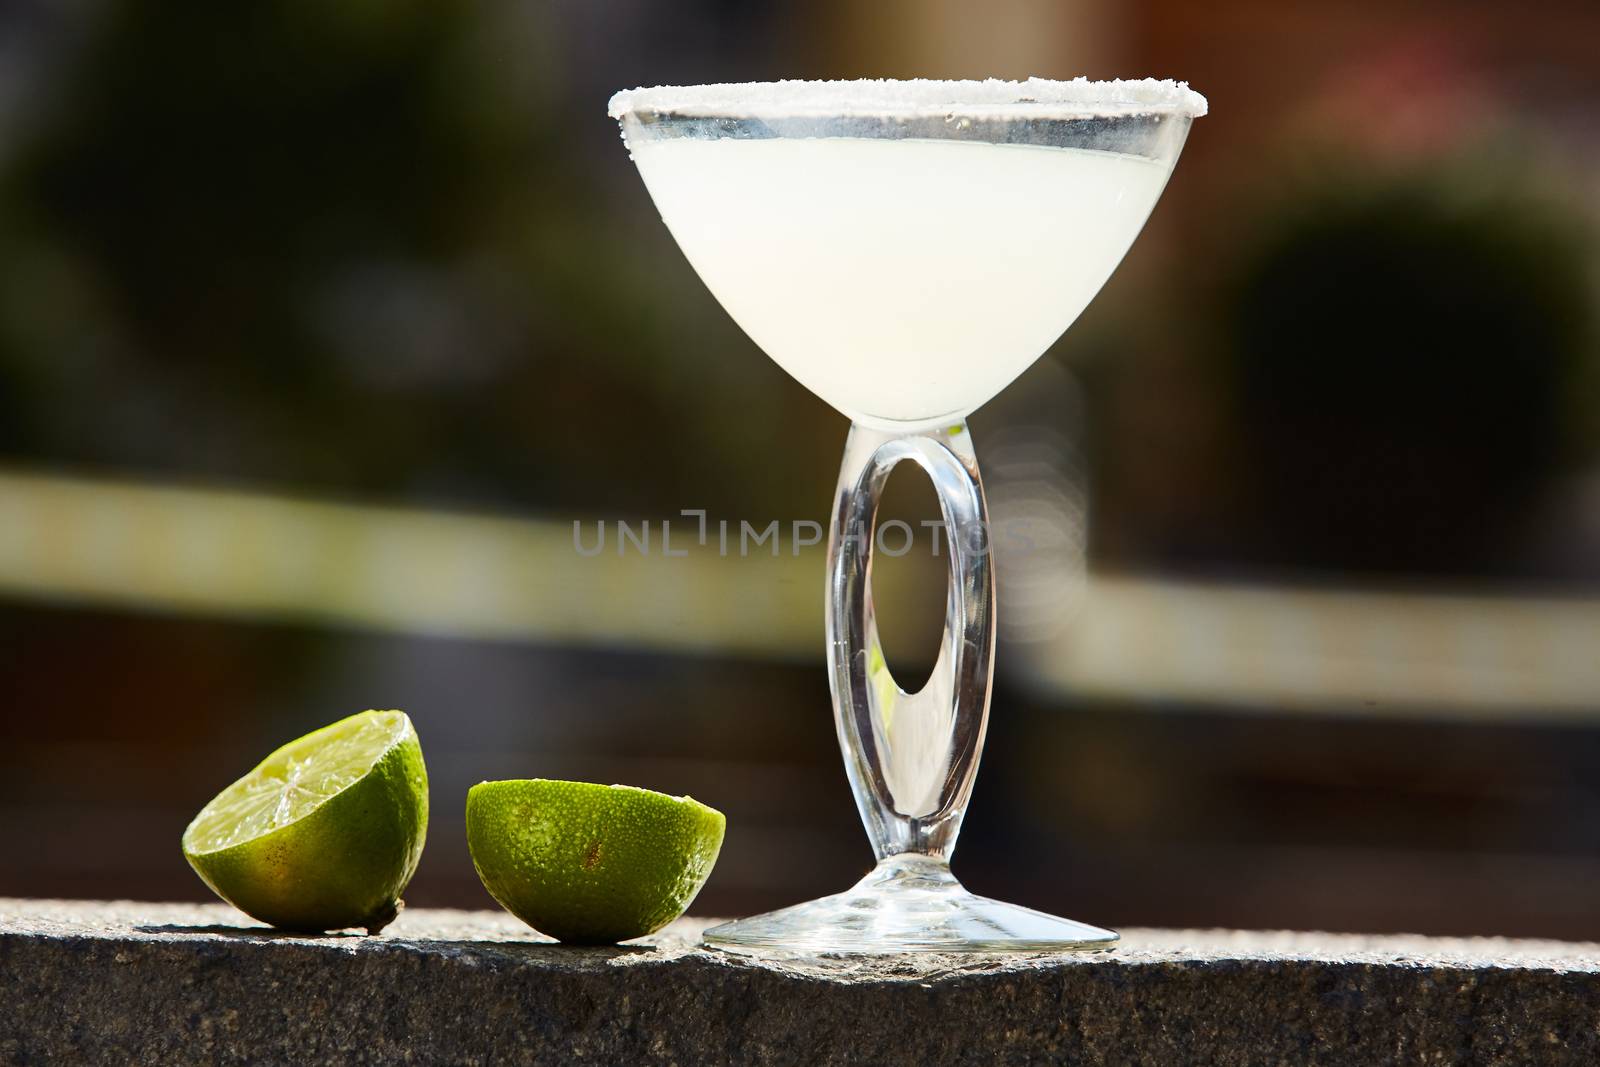 Cocktail in margarita glass with limes. Shallow dof